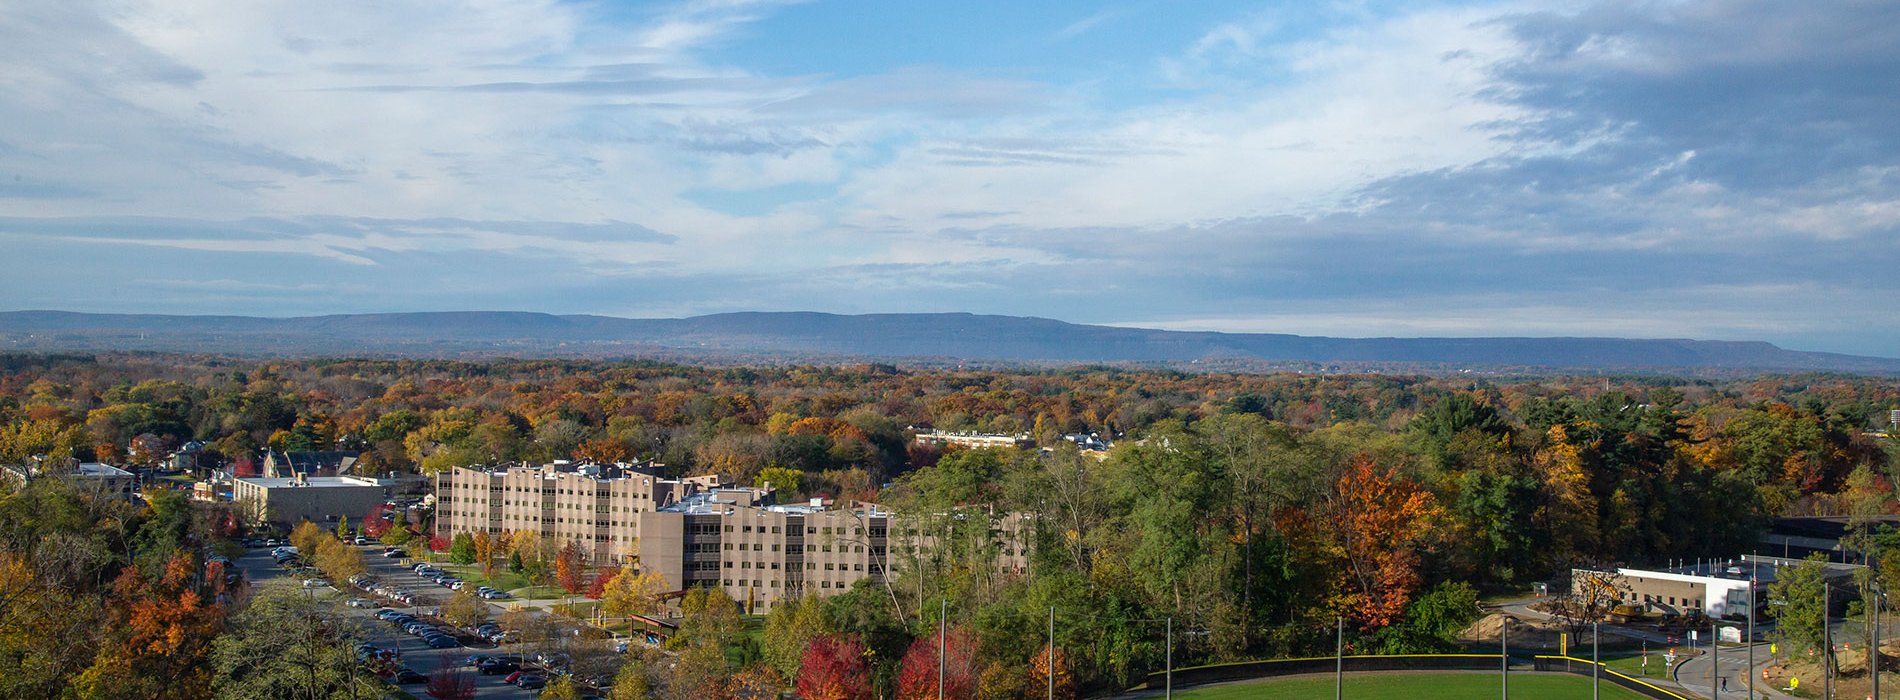 Aerial image of campus in the fall